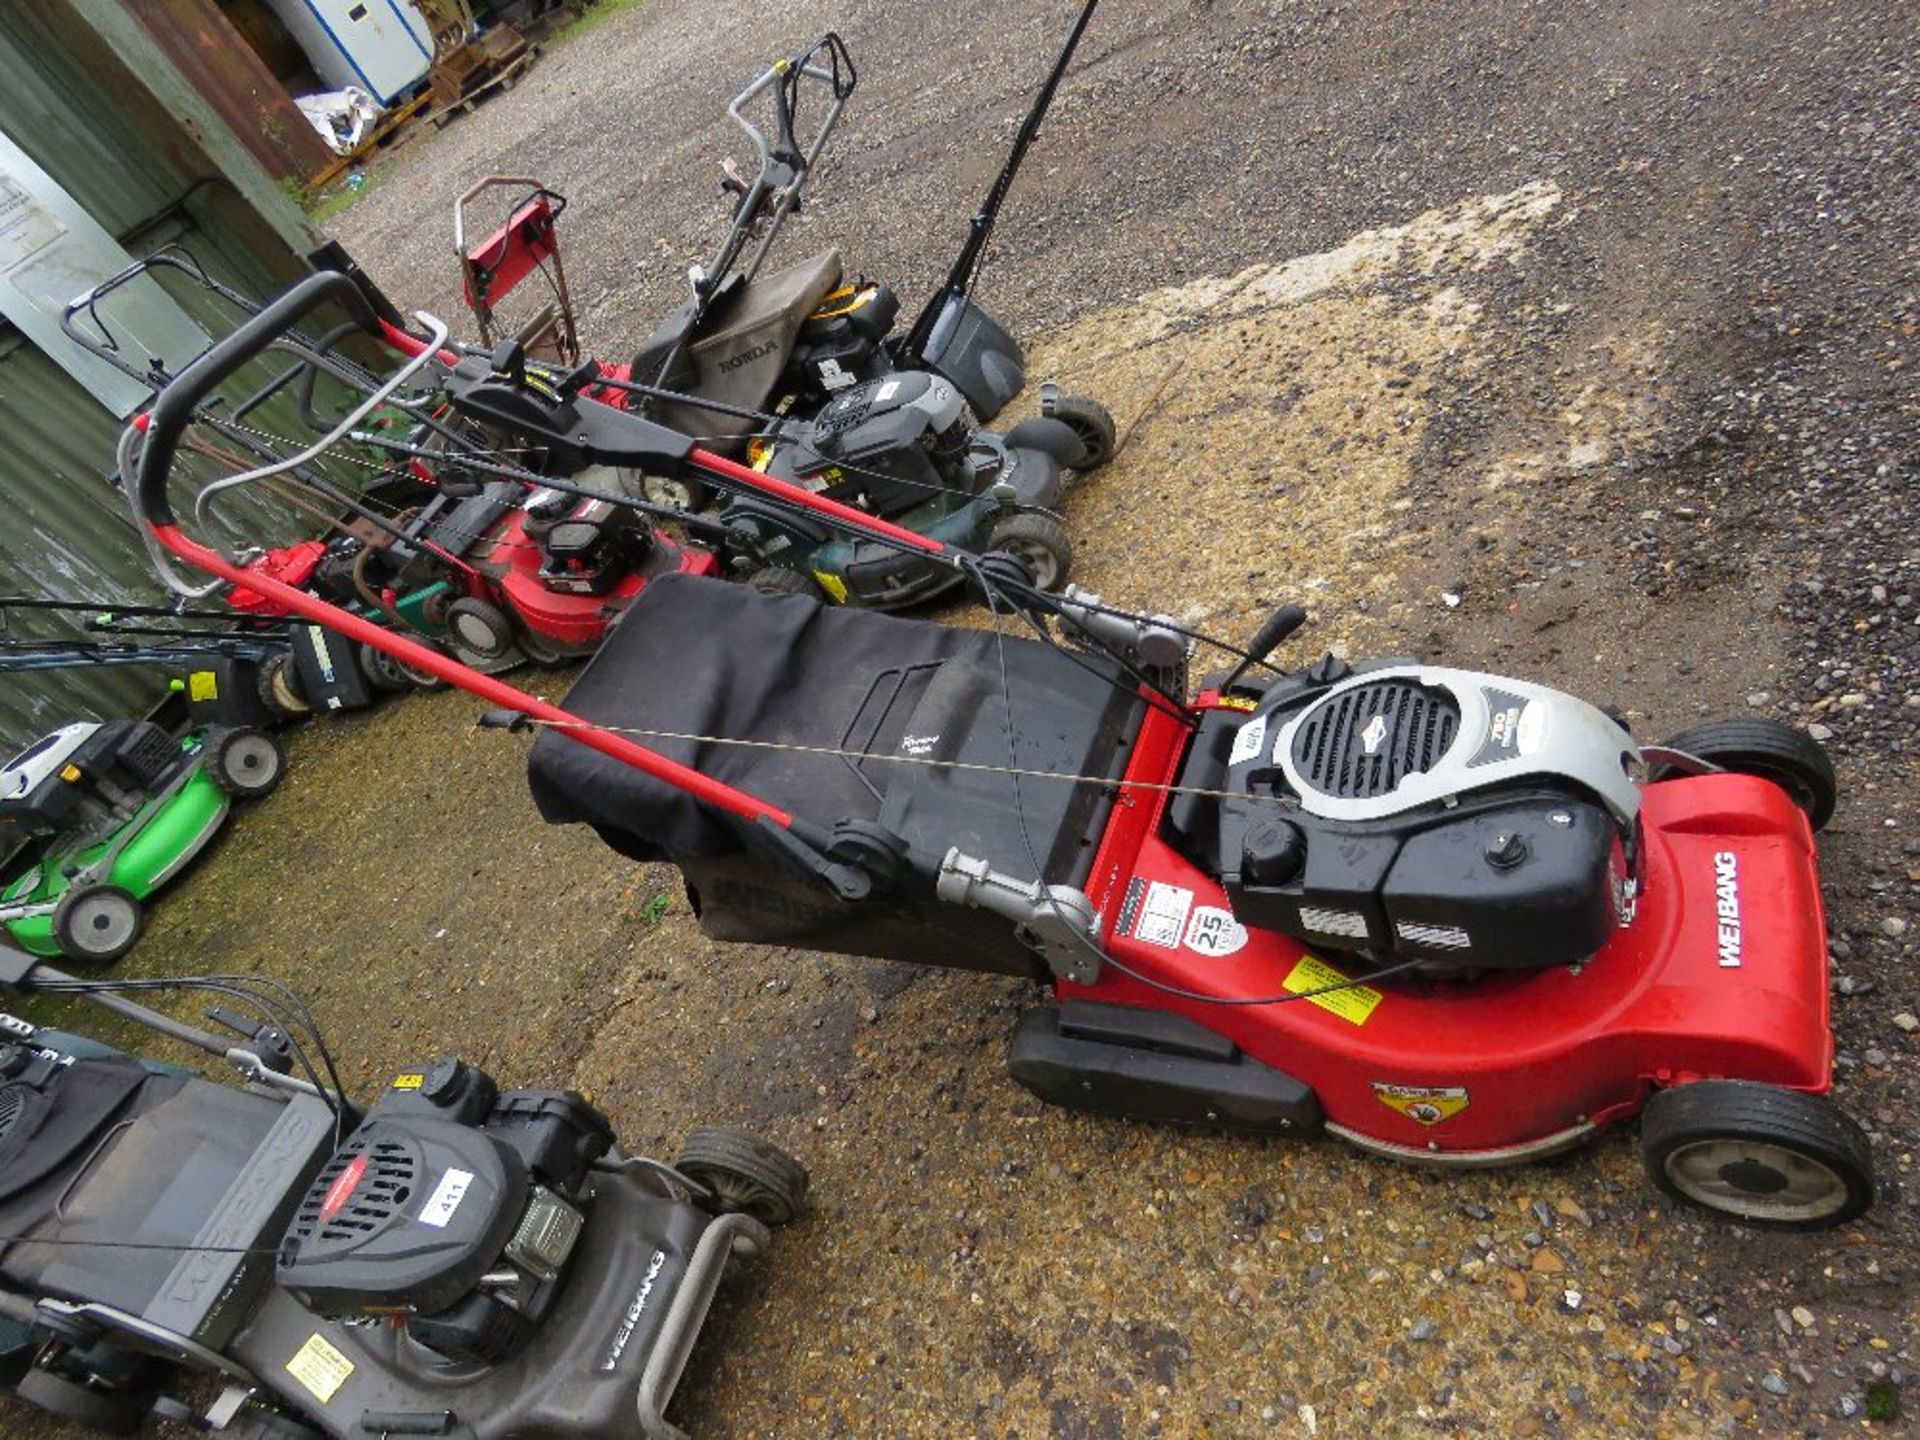 WEIBANG LEGACY 48V ROLLER MOWER WITH COLLECTOR. DIRECT FROM LOCAL LANDSCAPE COMPANY WHO ARE CLOSING - Image 2 of 3